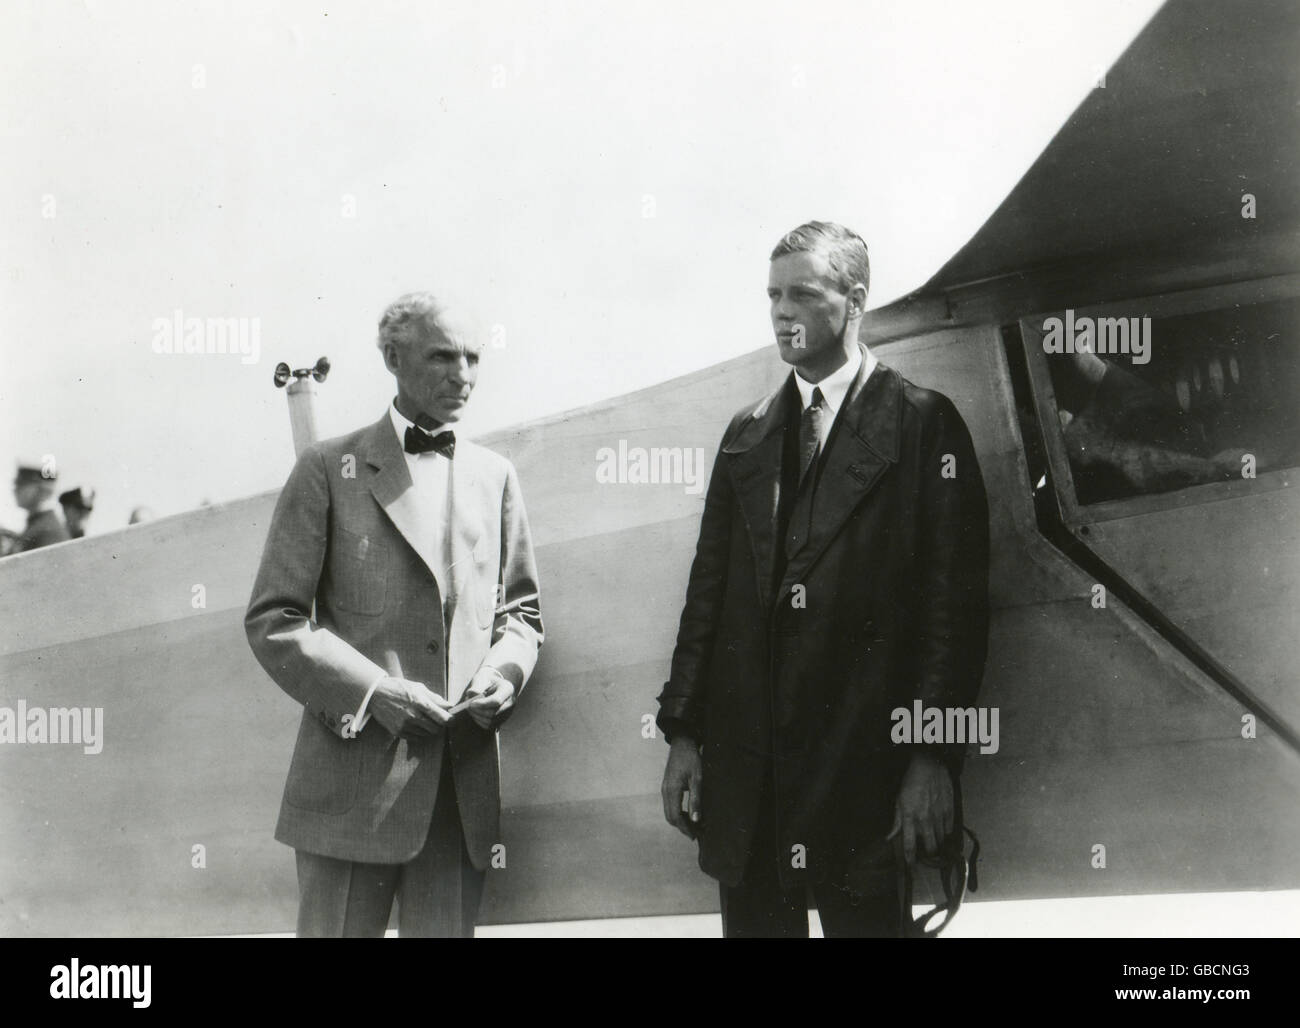 The Lone Eagle, Charles A. Lindbergh, stands with Henry Ford beside the 'Spirit of St. Louis,' the plane in which Col. Lindbergh flew the first trans-Atlantic solo flight in 1927. Stock Photo